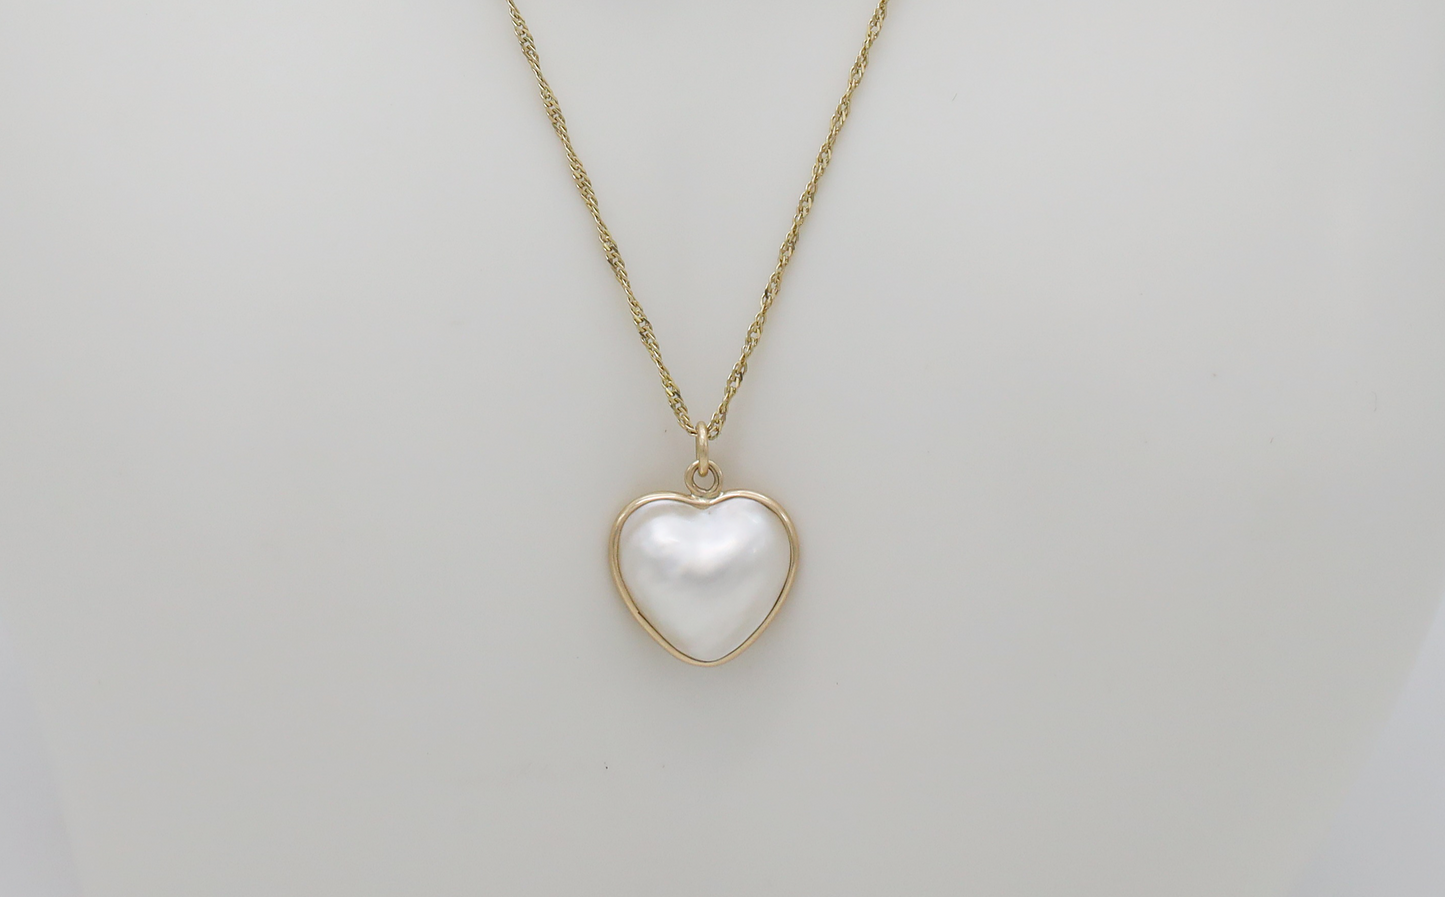 14k Yellow Gold Mother of Pearl Heart Shape Pendant Necklace, 15 inches - 2.6g